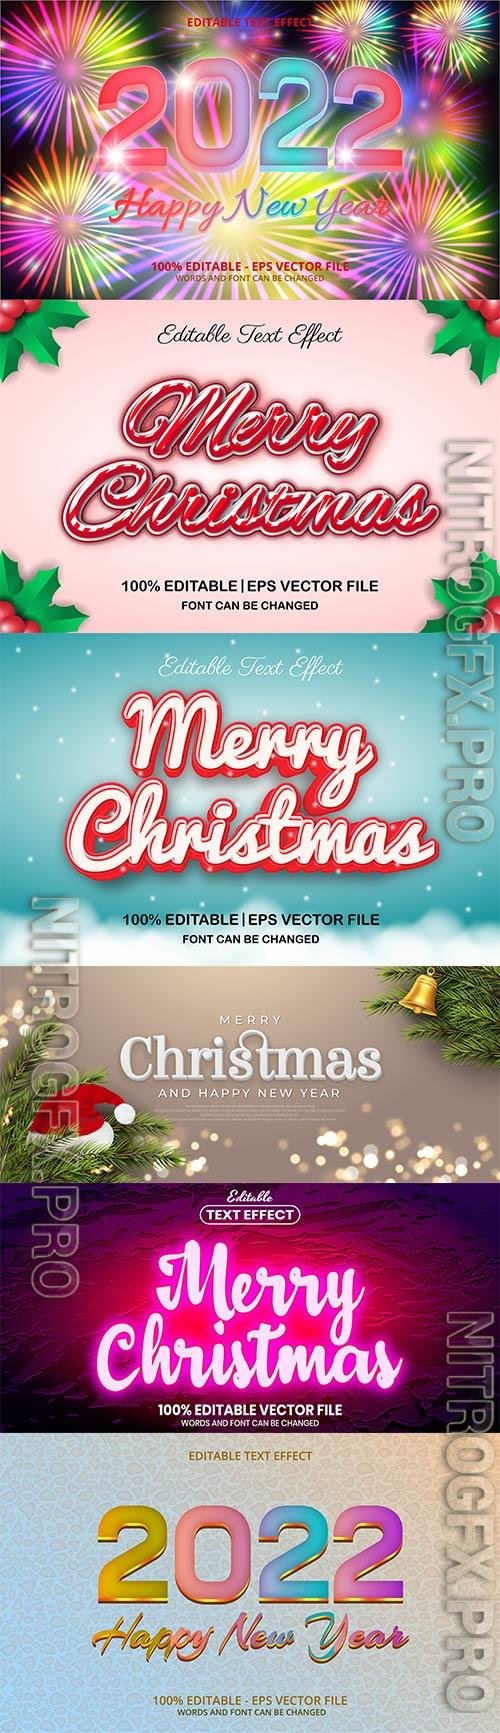 Merry christmas and happy new year 2022 editable vector text effects vol 6